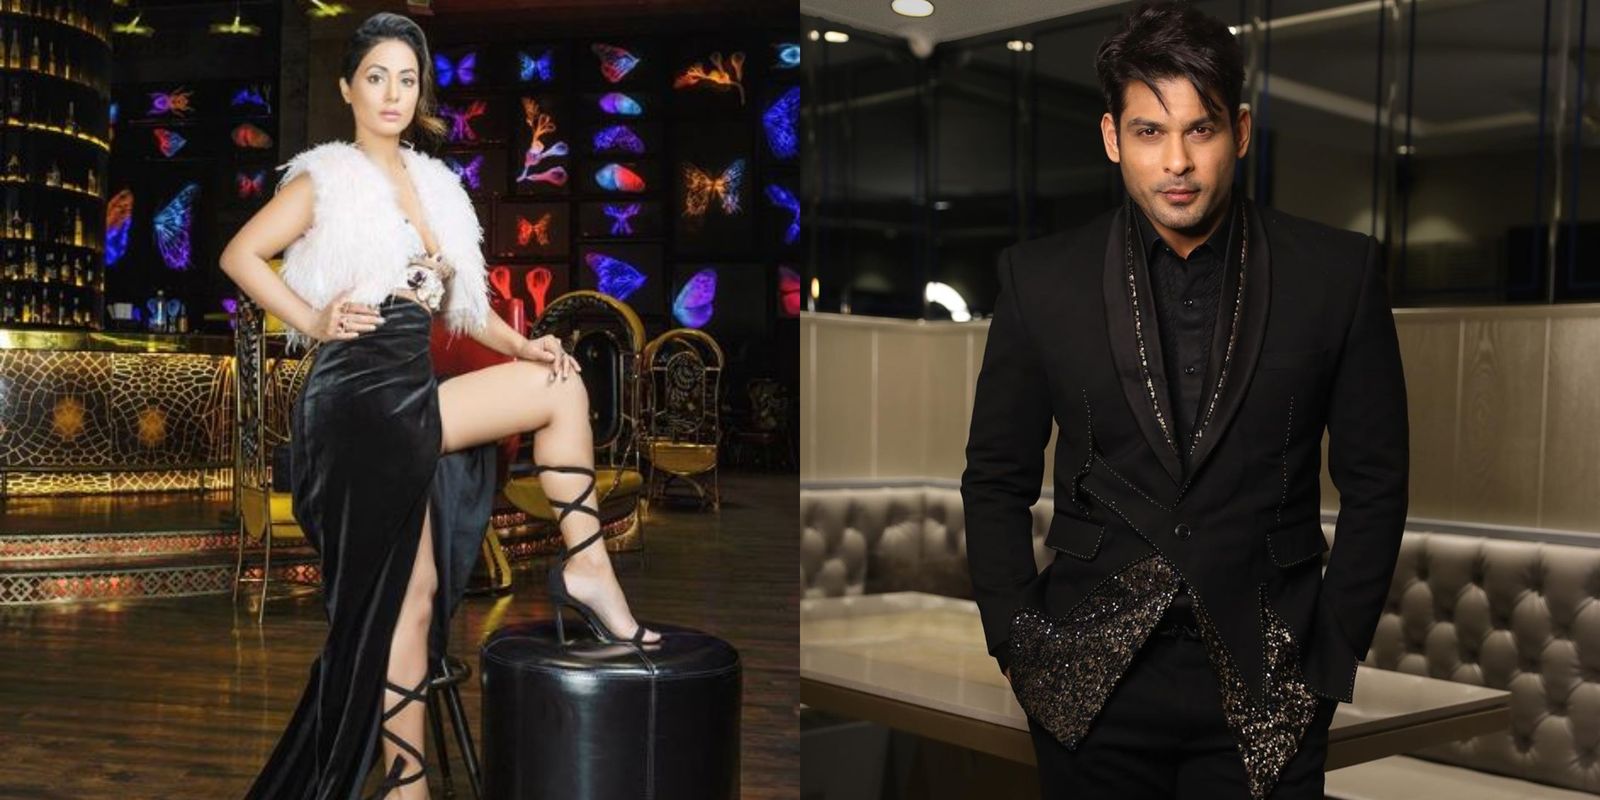 Bigg Boss 14: Sidharth Shukla, Hina Khan & Other Ex Contestants To Have Special Powers On The Show?